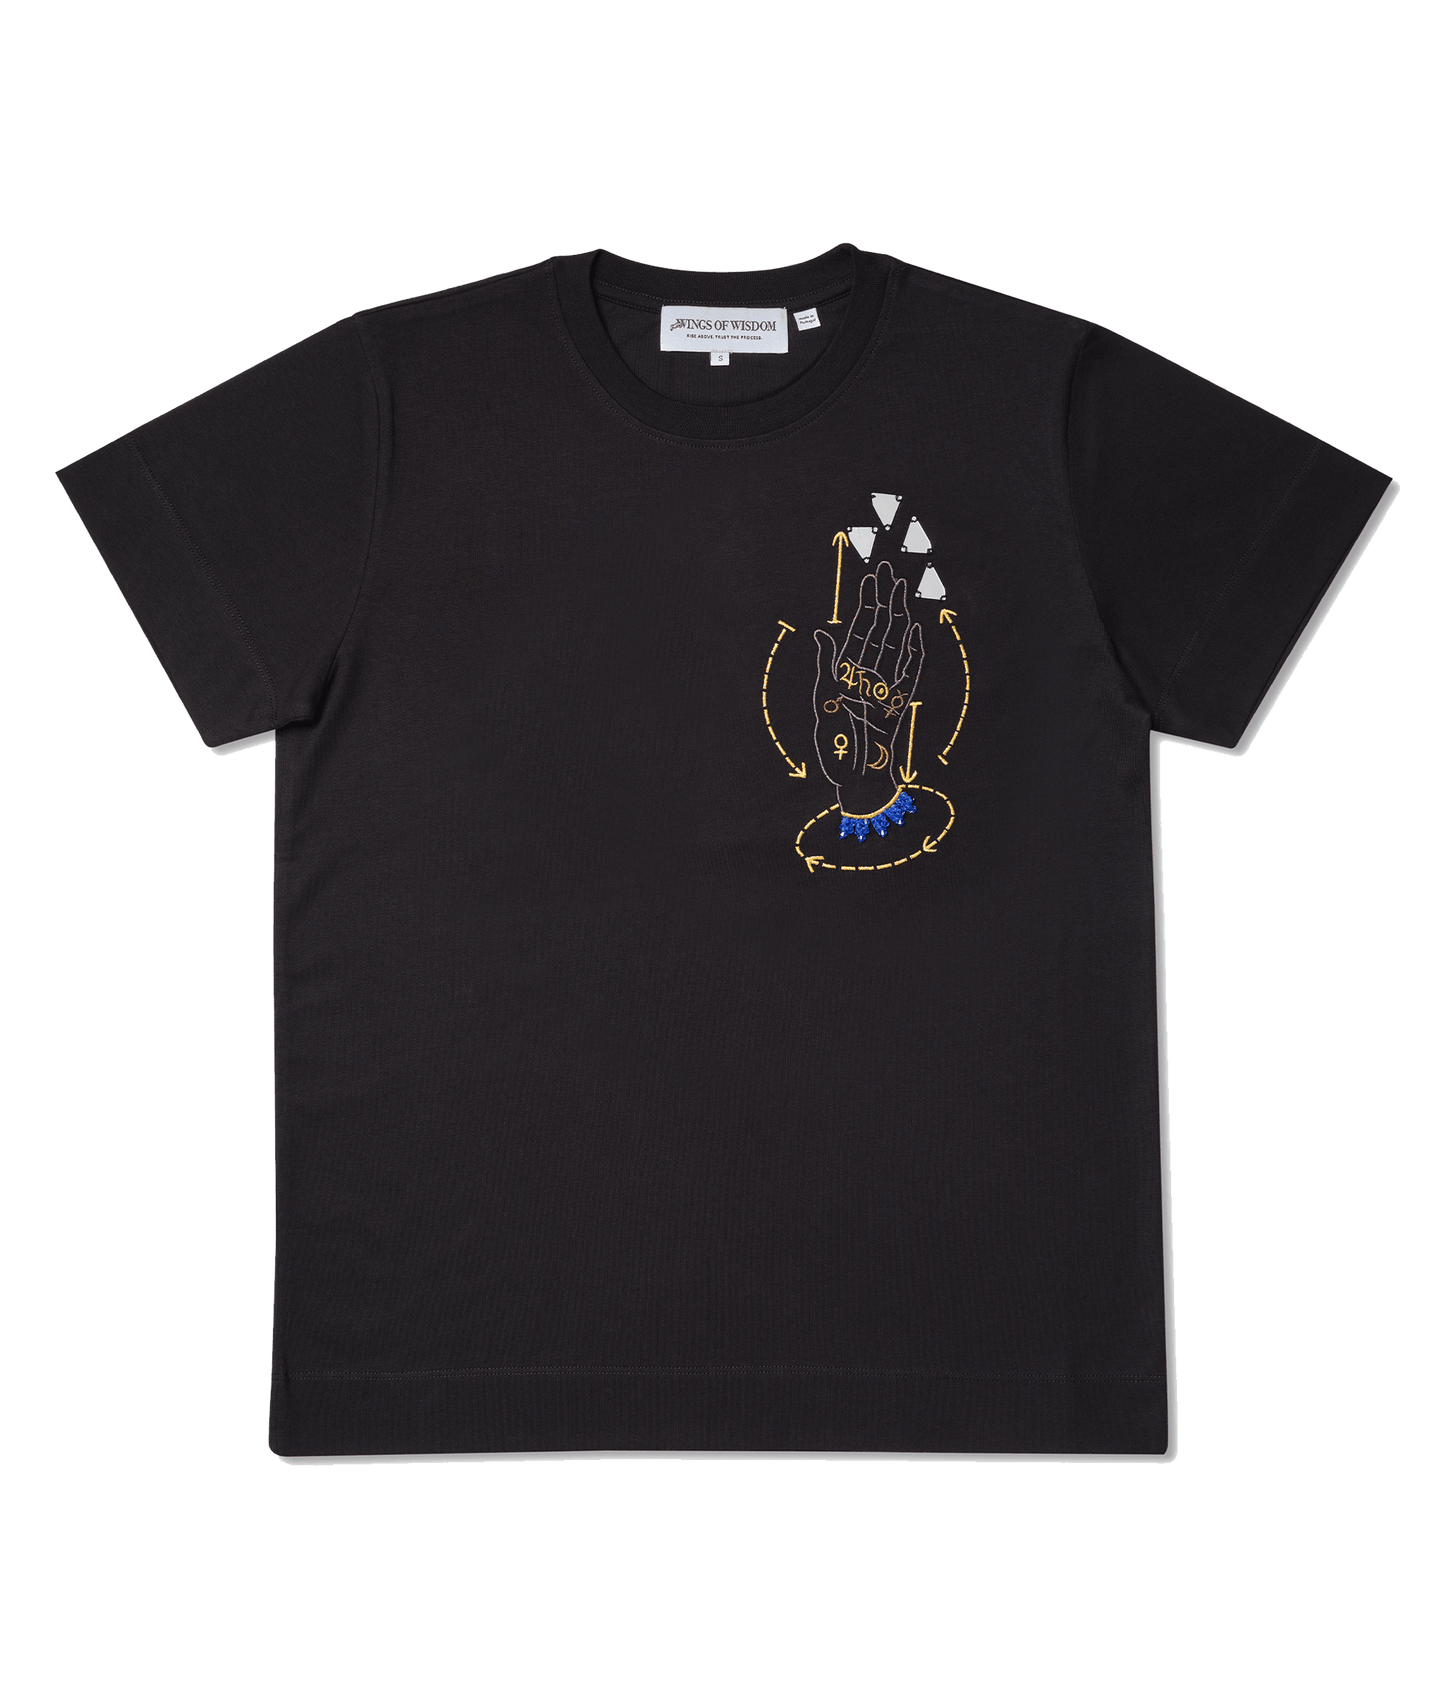 'A Helping Hand' Black T-Shirt - Wing of Wisdom